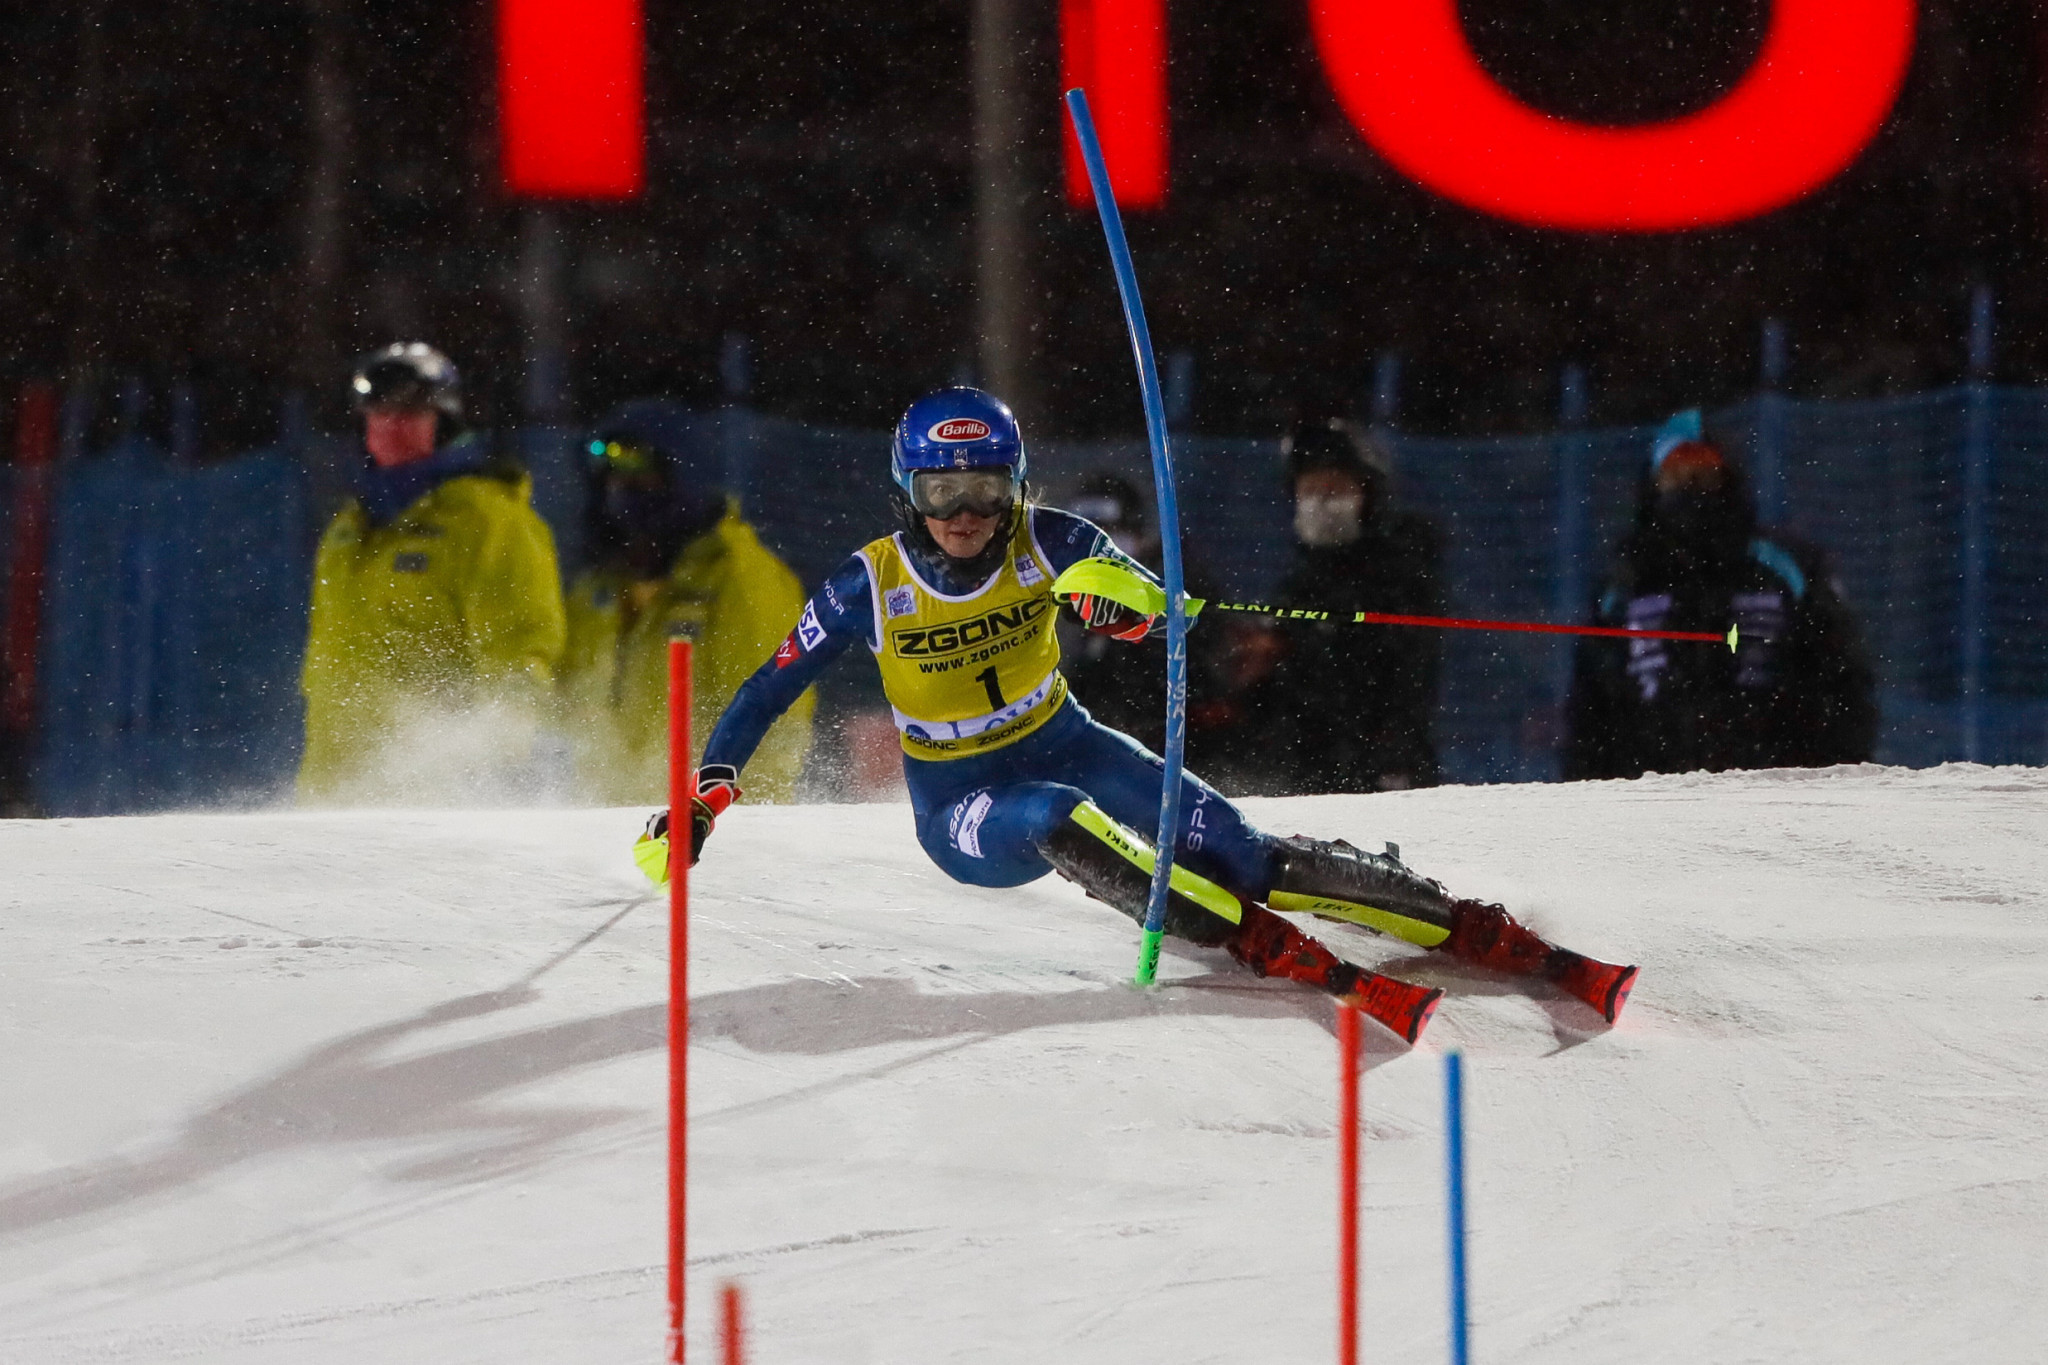 Mikaela Shiffrin had a solid comeback, finishing second in the women's slalom ©Getty Images